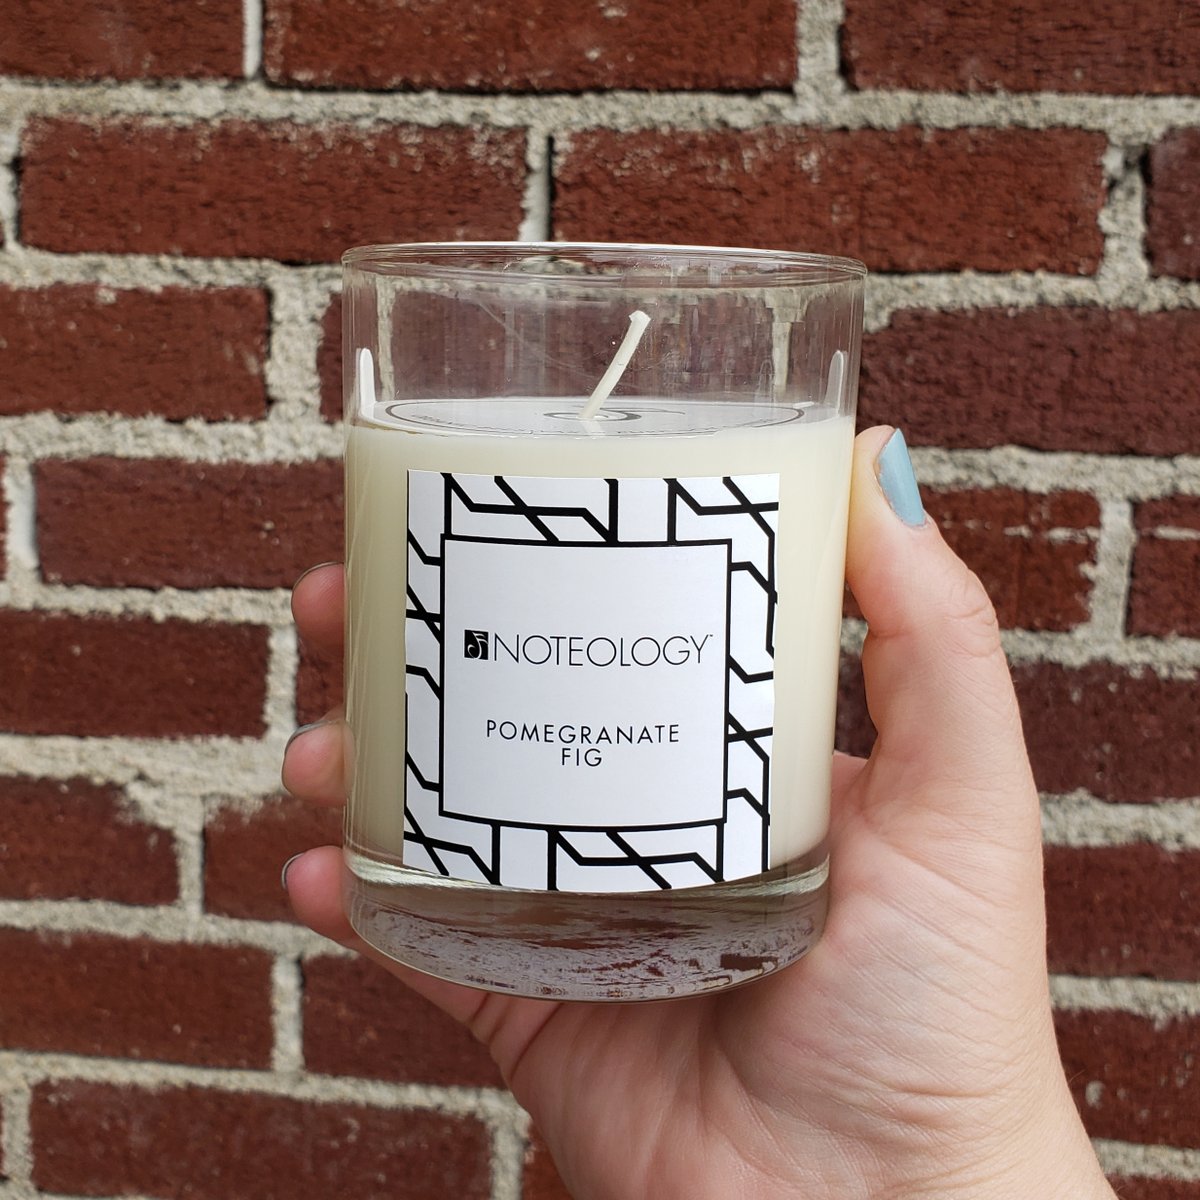 Pomegranate Fig ... an unexpected holiday scent 🎄 as unique as you are. 😎

#christmasscents #soycandles #handpoured #shoplocal #shopScranton #notefragrances #newname #noteology